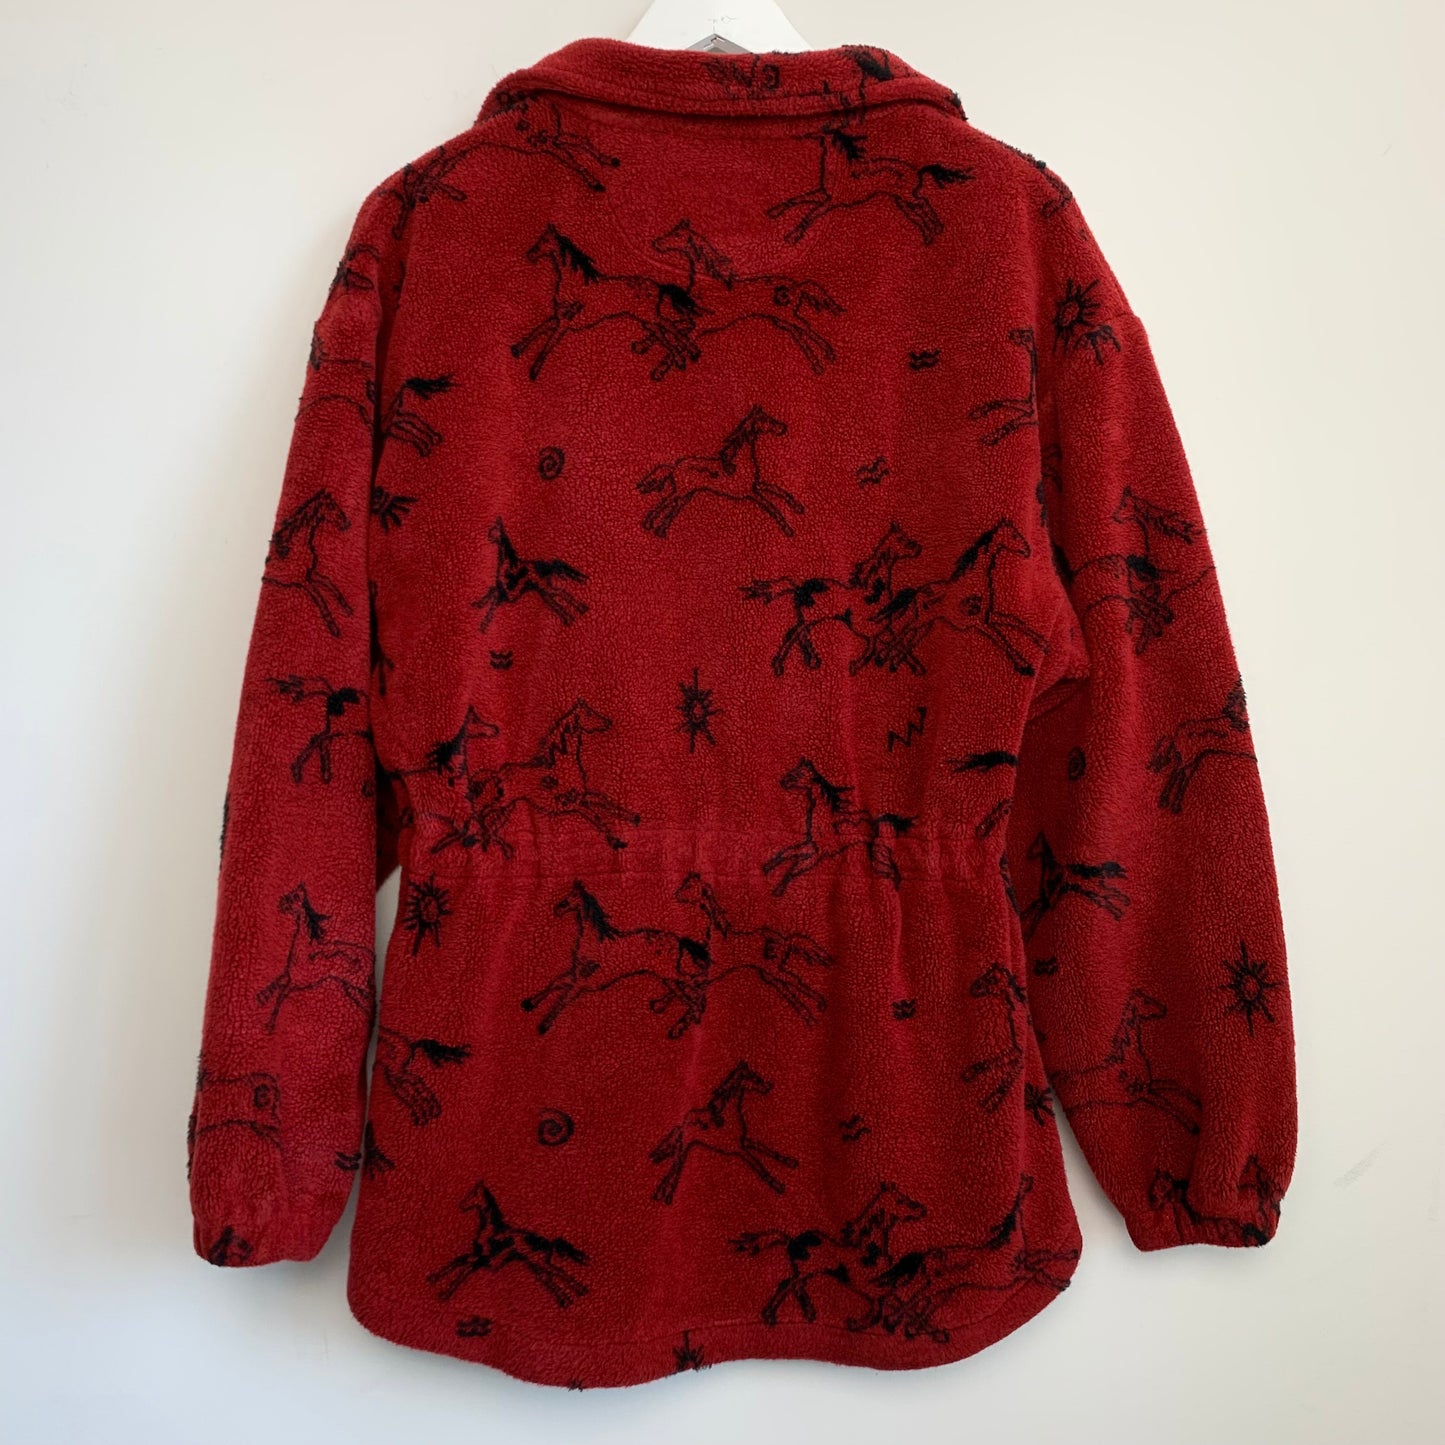 90s Tsunami Horse Fleece Jacket Red and Black with a Collar Size Small